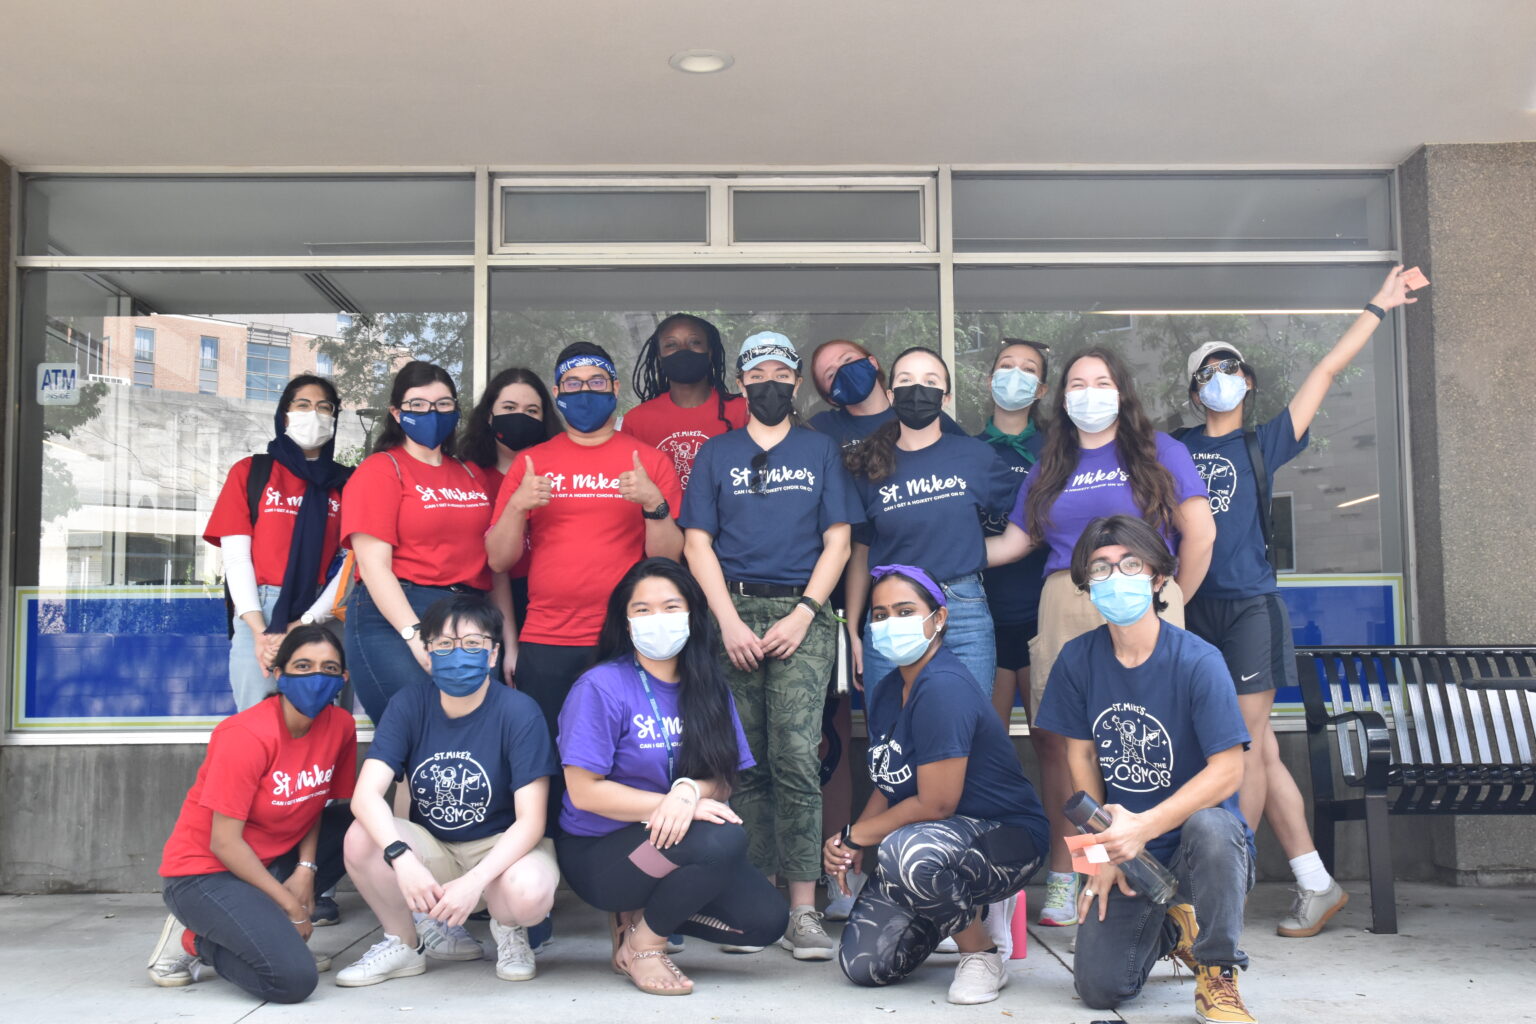 Photograph of the St. Mike's Orientation 2021 marshal team, all wearing masks St. Mike's shirts, standing in front of the Brennan COOP.